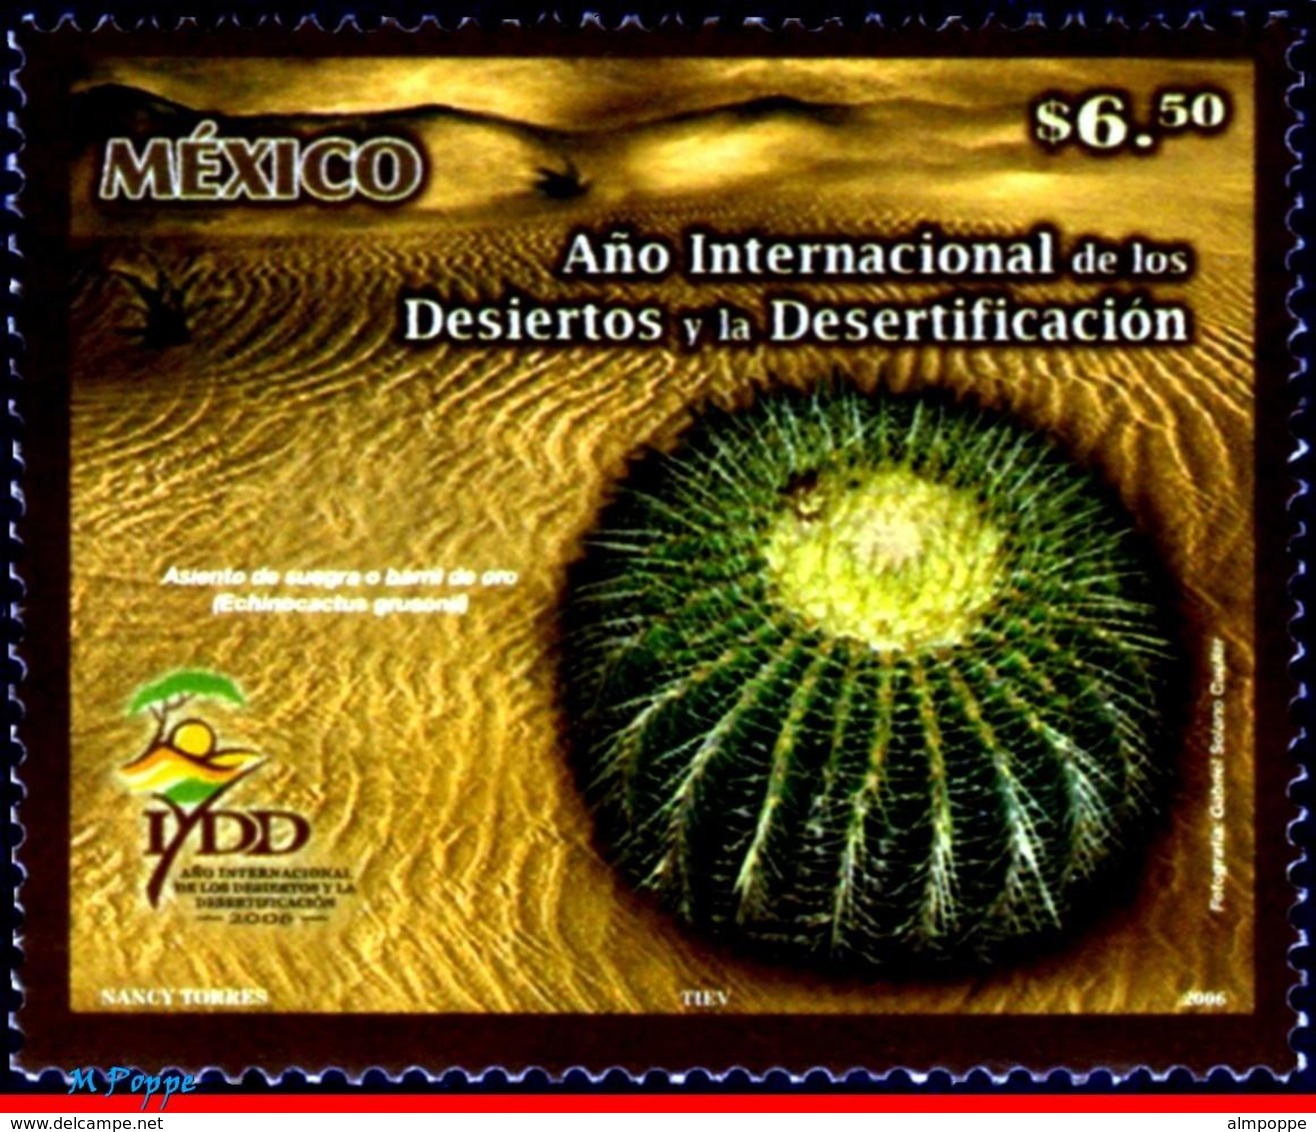 Ref. MX-2523 MEXICO 2006 FLOWERS, PLANTS, INTL.YEAR OF DESERTS AND, DESERTIFICATION, CACTUS, MNH 1V Sc# 2523 - Mexico